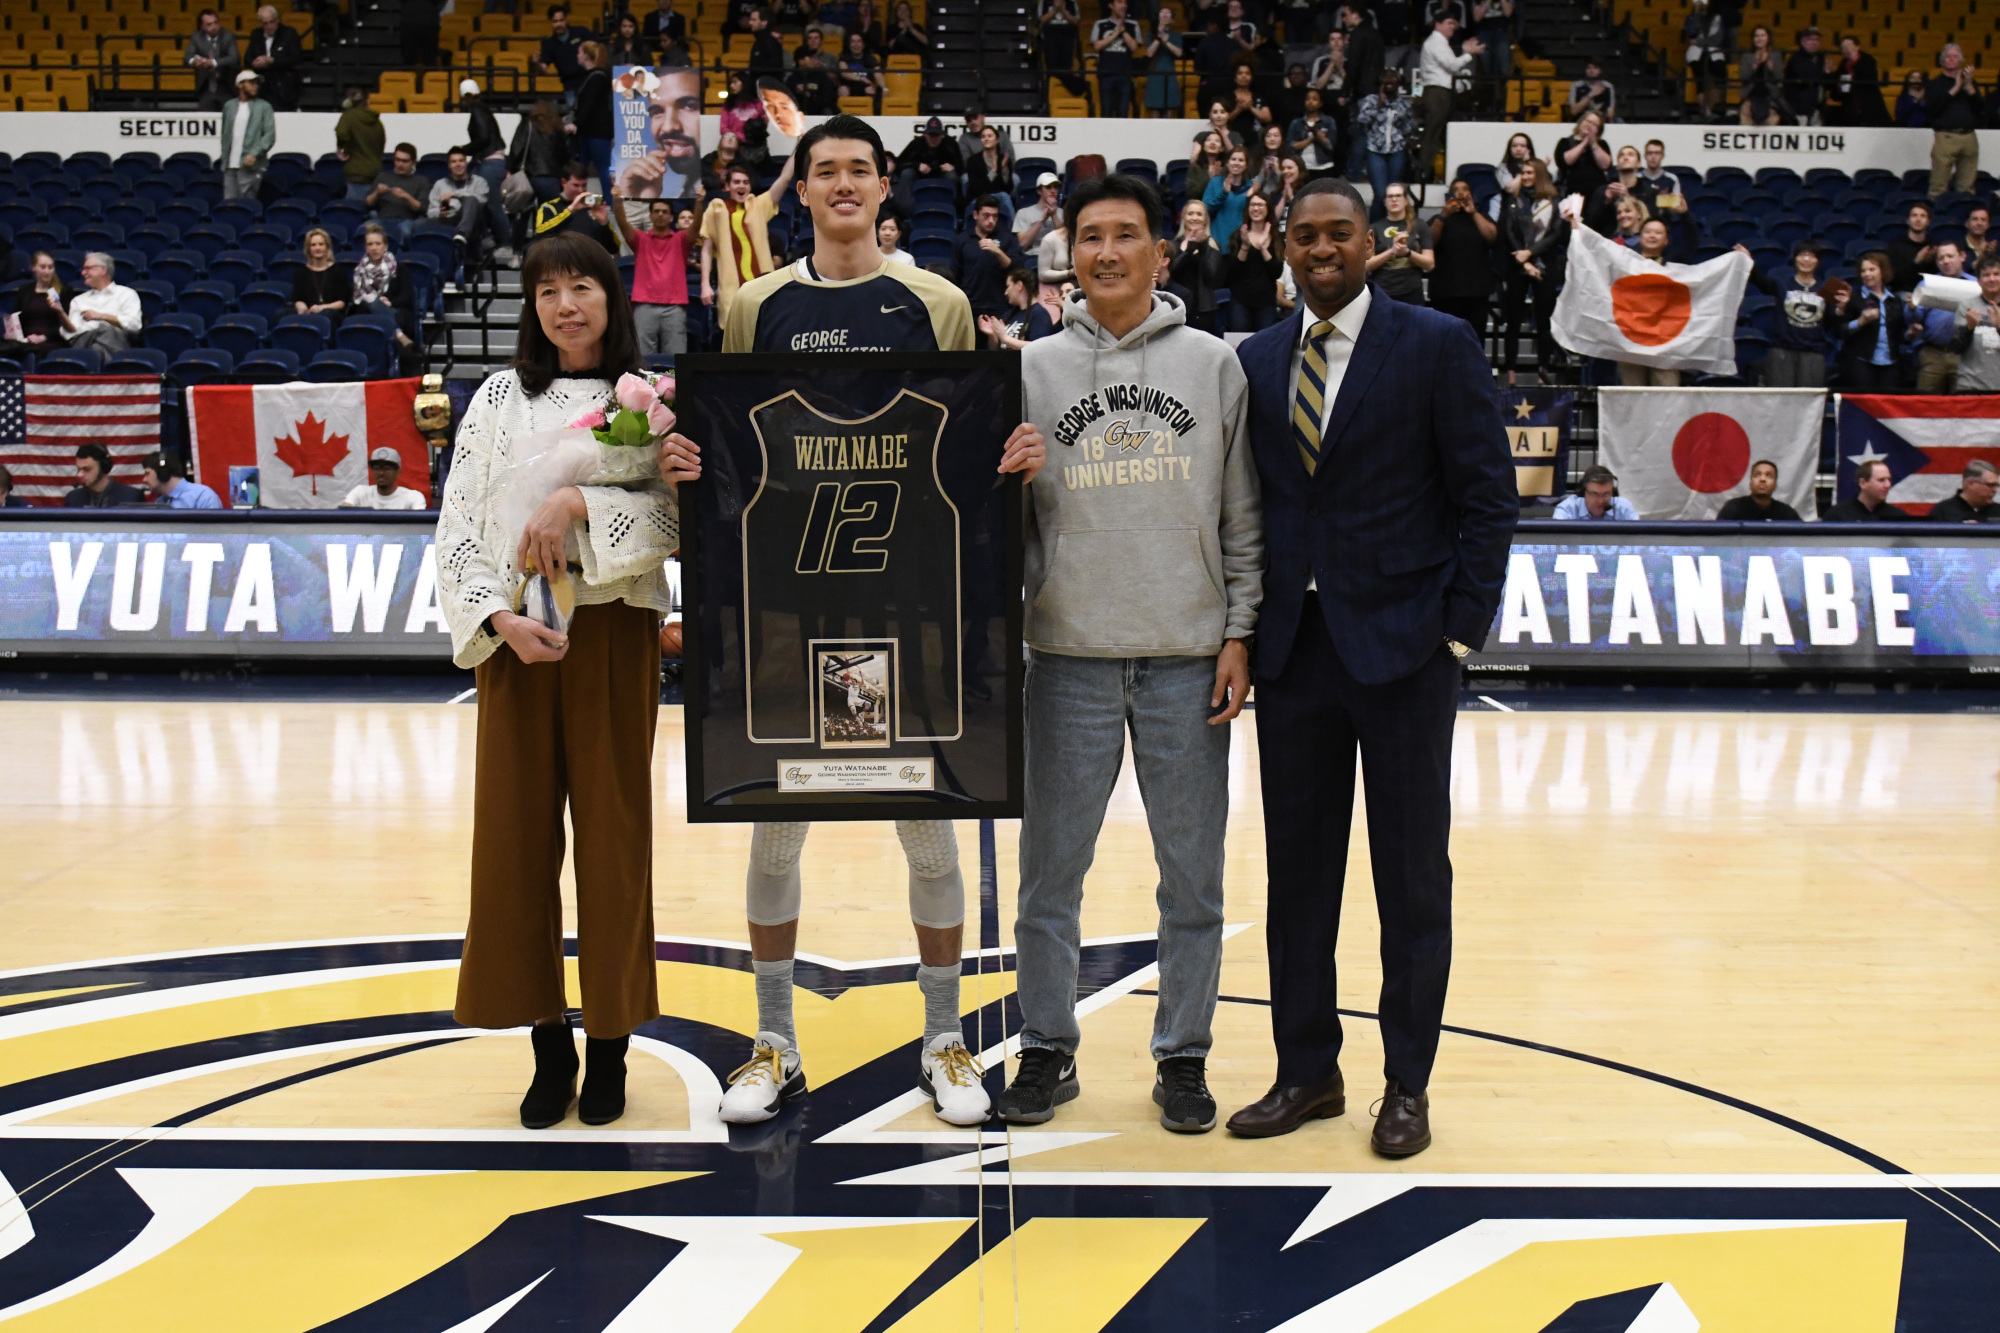 George Washington University senior star Yuta Watanabe, joined by his parents Kumi and Hideyuki and coach Maurice Joseph, was honored before the team's final home game of the 2017-18 season on Feb. 28. | GW ATHLETICS